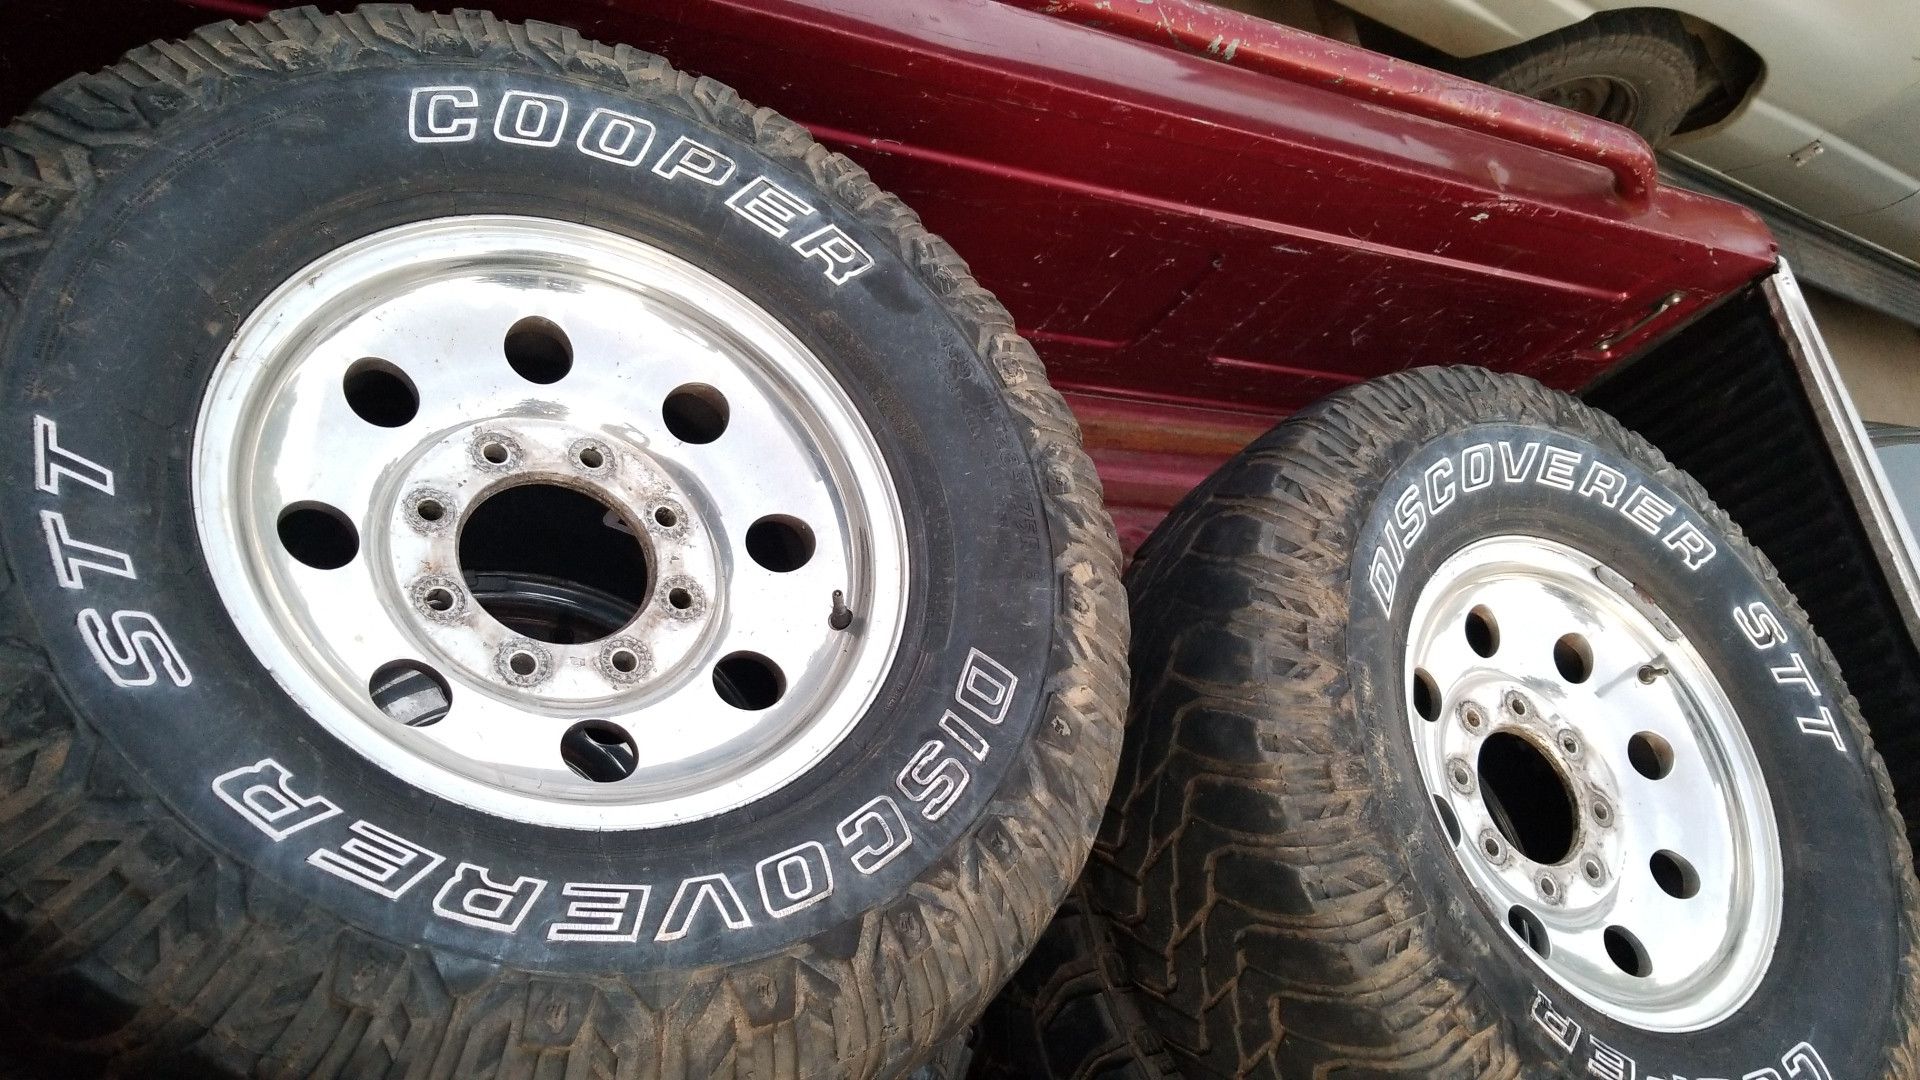 Rims for f250 with 8 holes. Price:$250